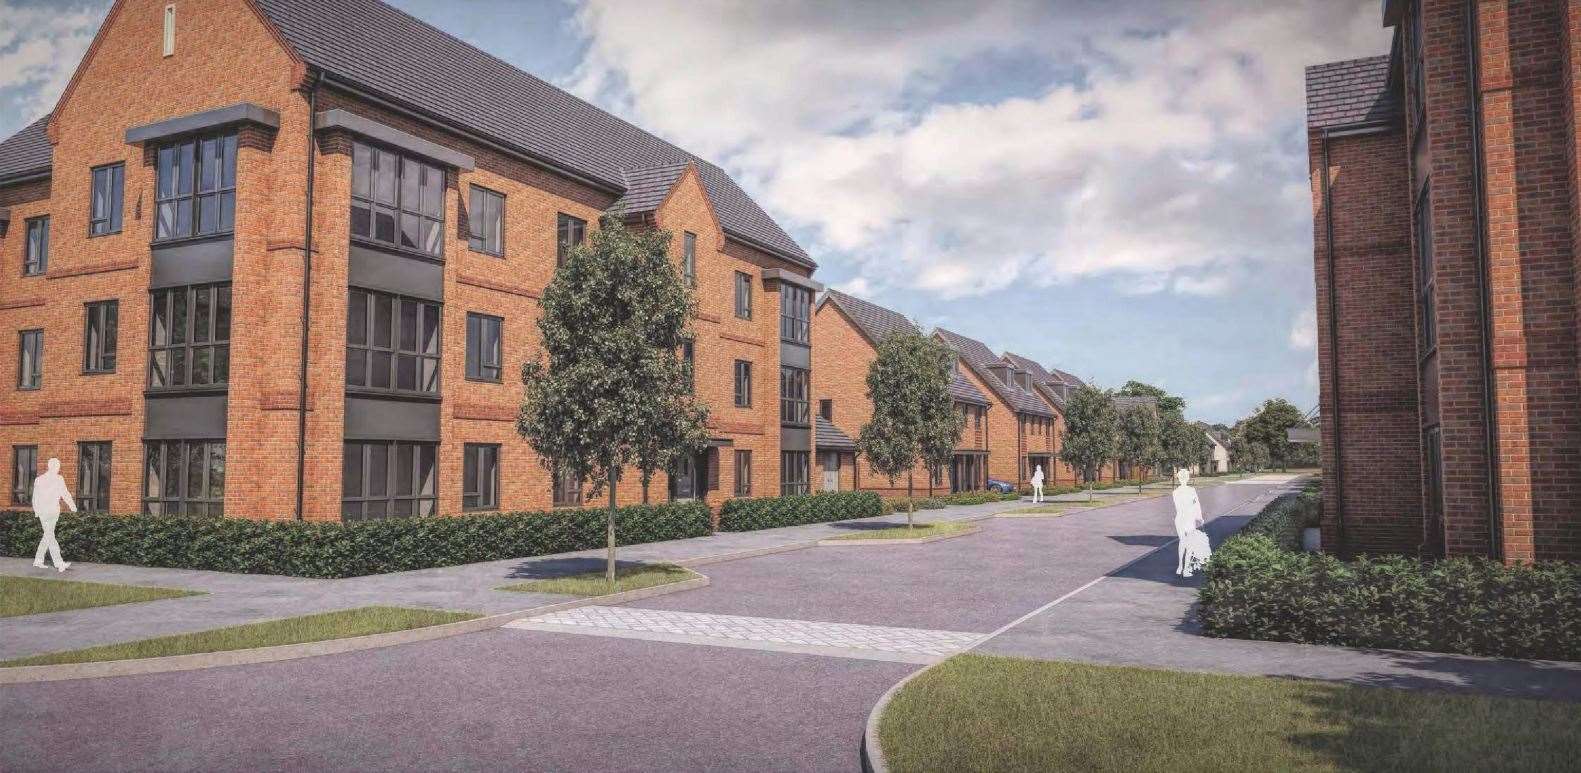 How planned homes at Napier Barracks could look. Credit: Taylor Wimpey Design Statement